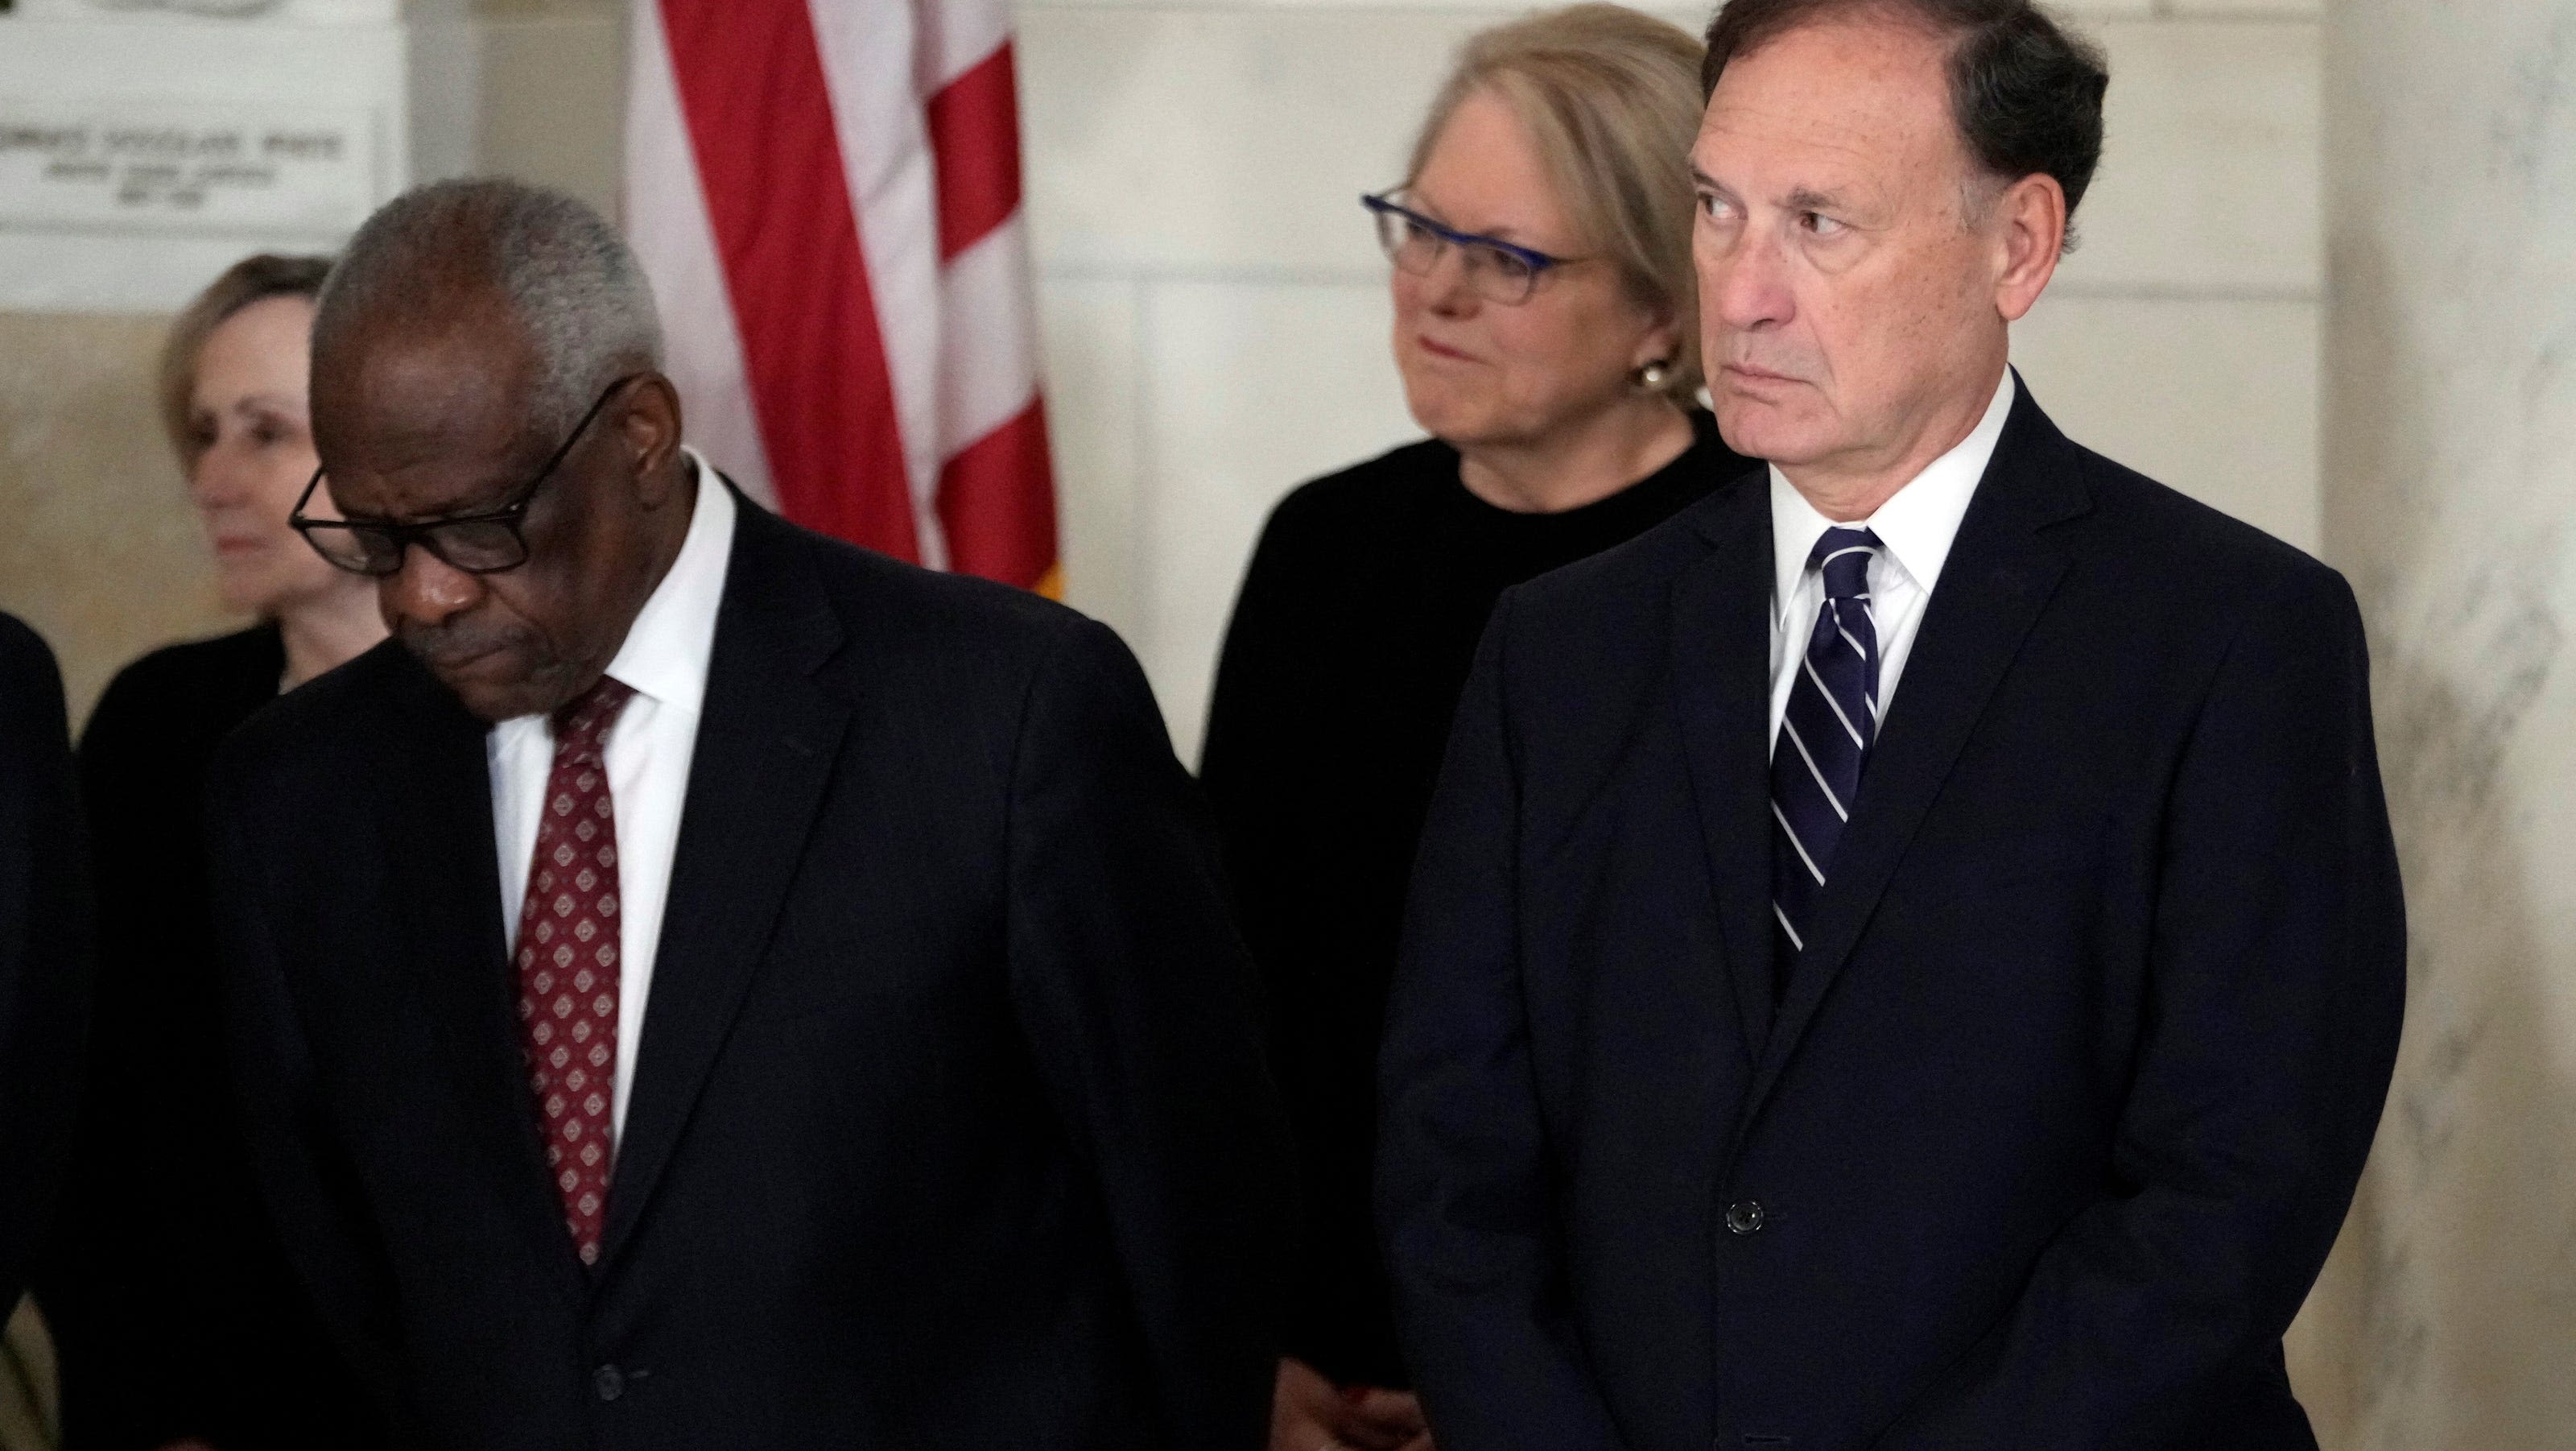 Justices Thomas, Alito complain about 'nastiness' and 'imperiled' freedom of religion